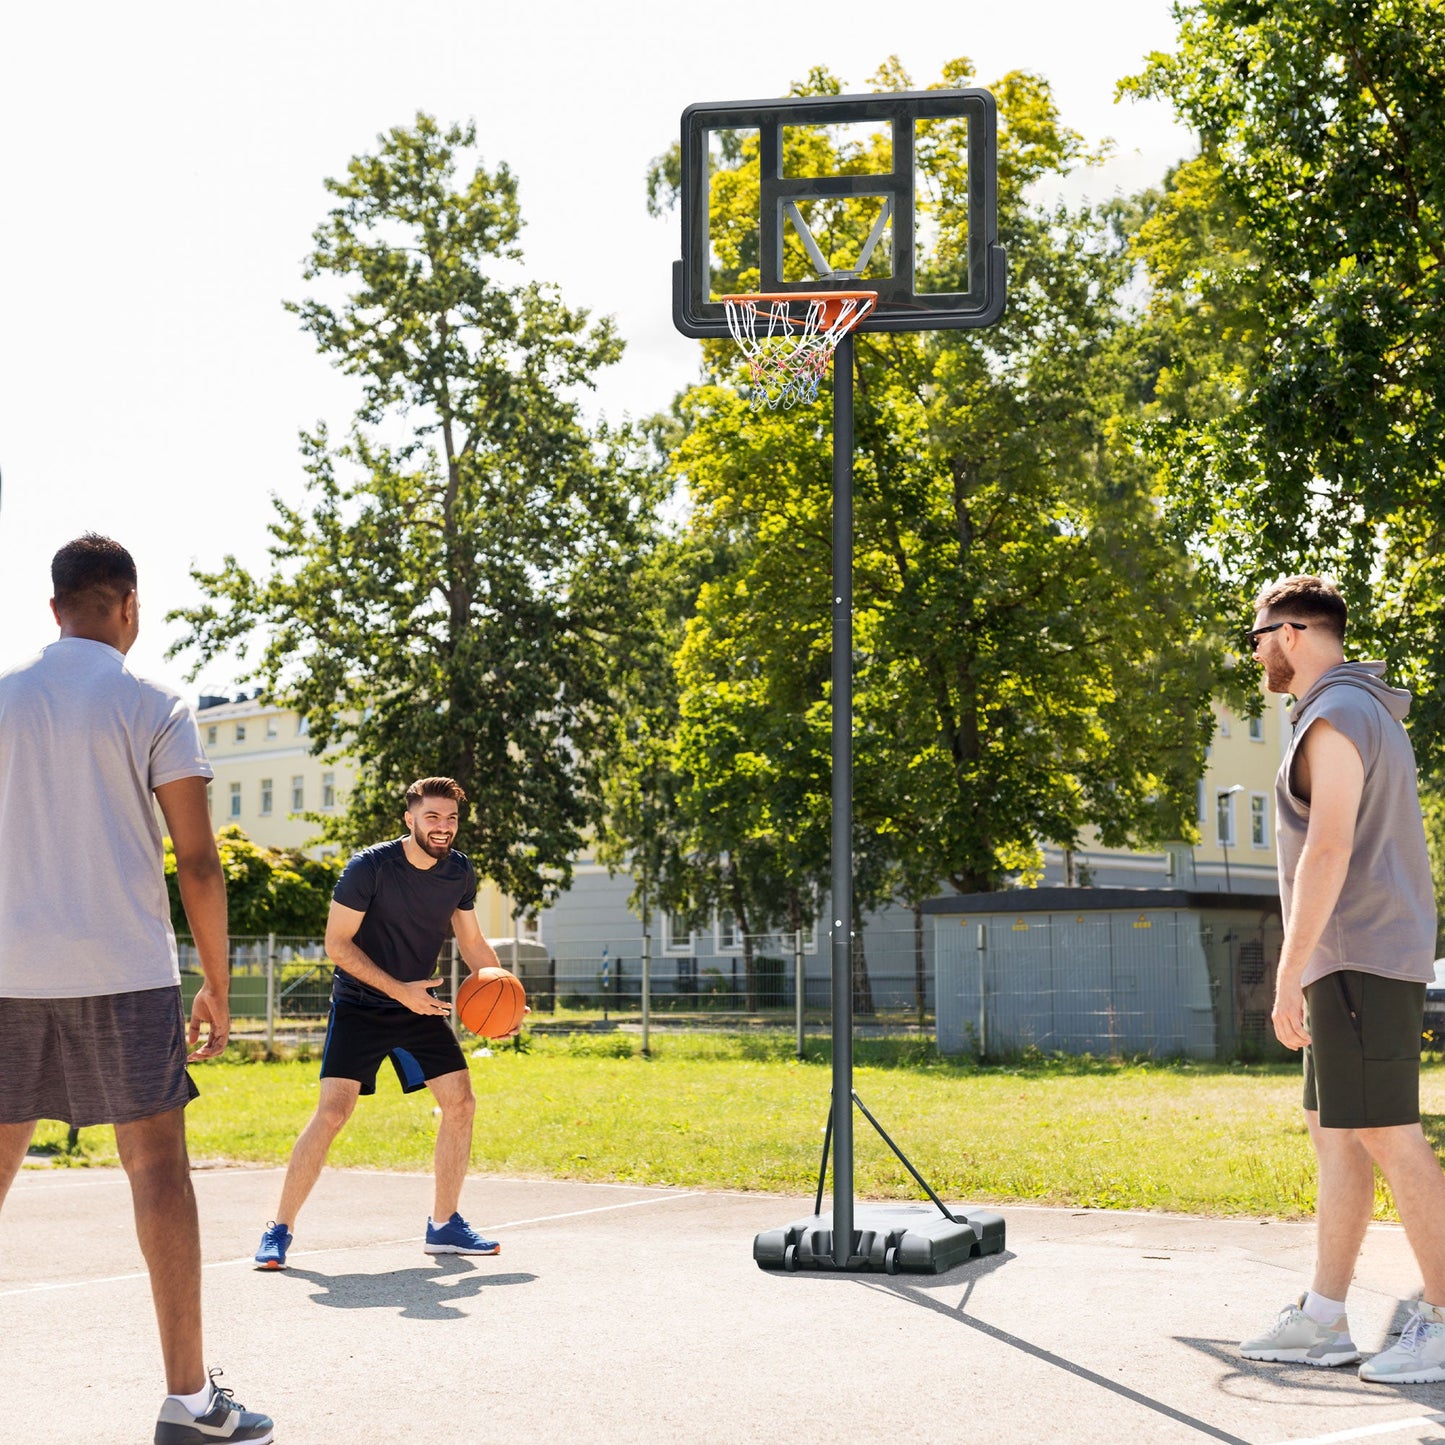 5ft-10ft Height Adjustable Basketball Hoop Stand, Portable Basketball System with Wheels and 45" Backboard for Youth Junior at Gallery Canada